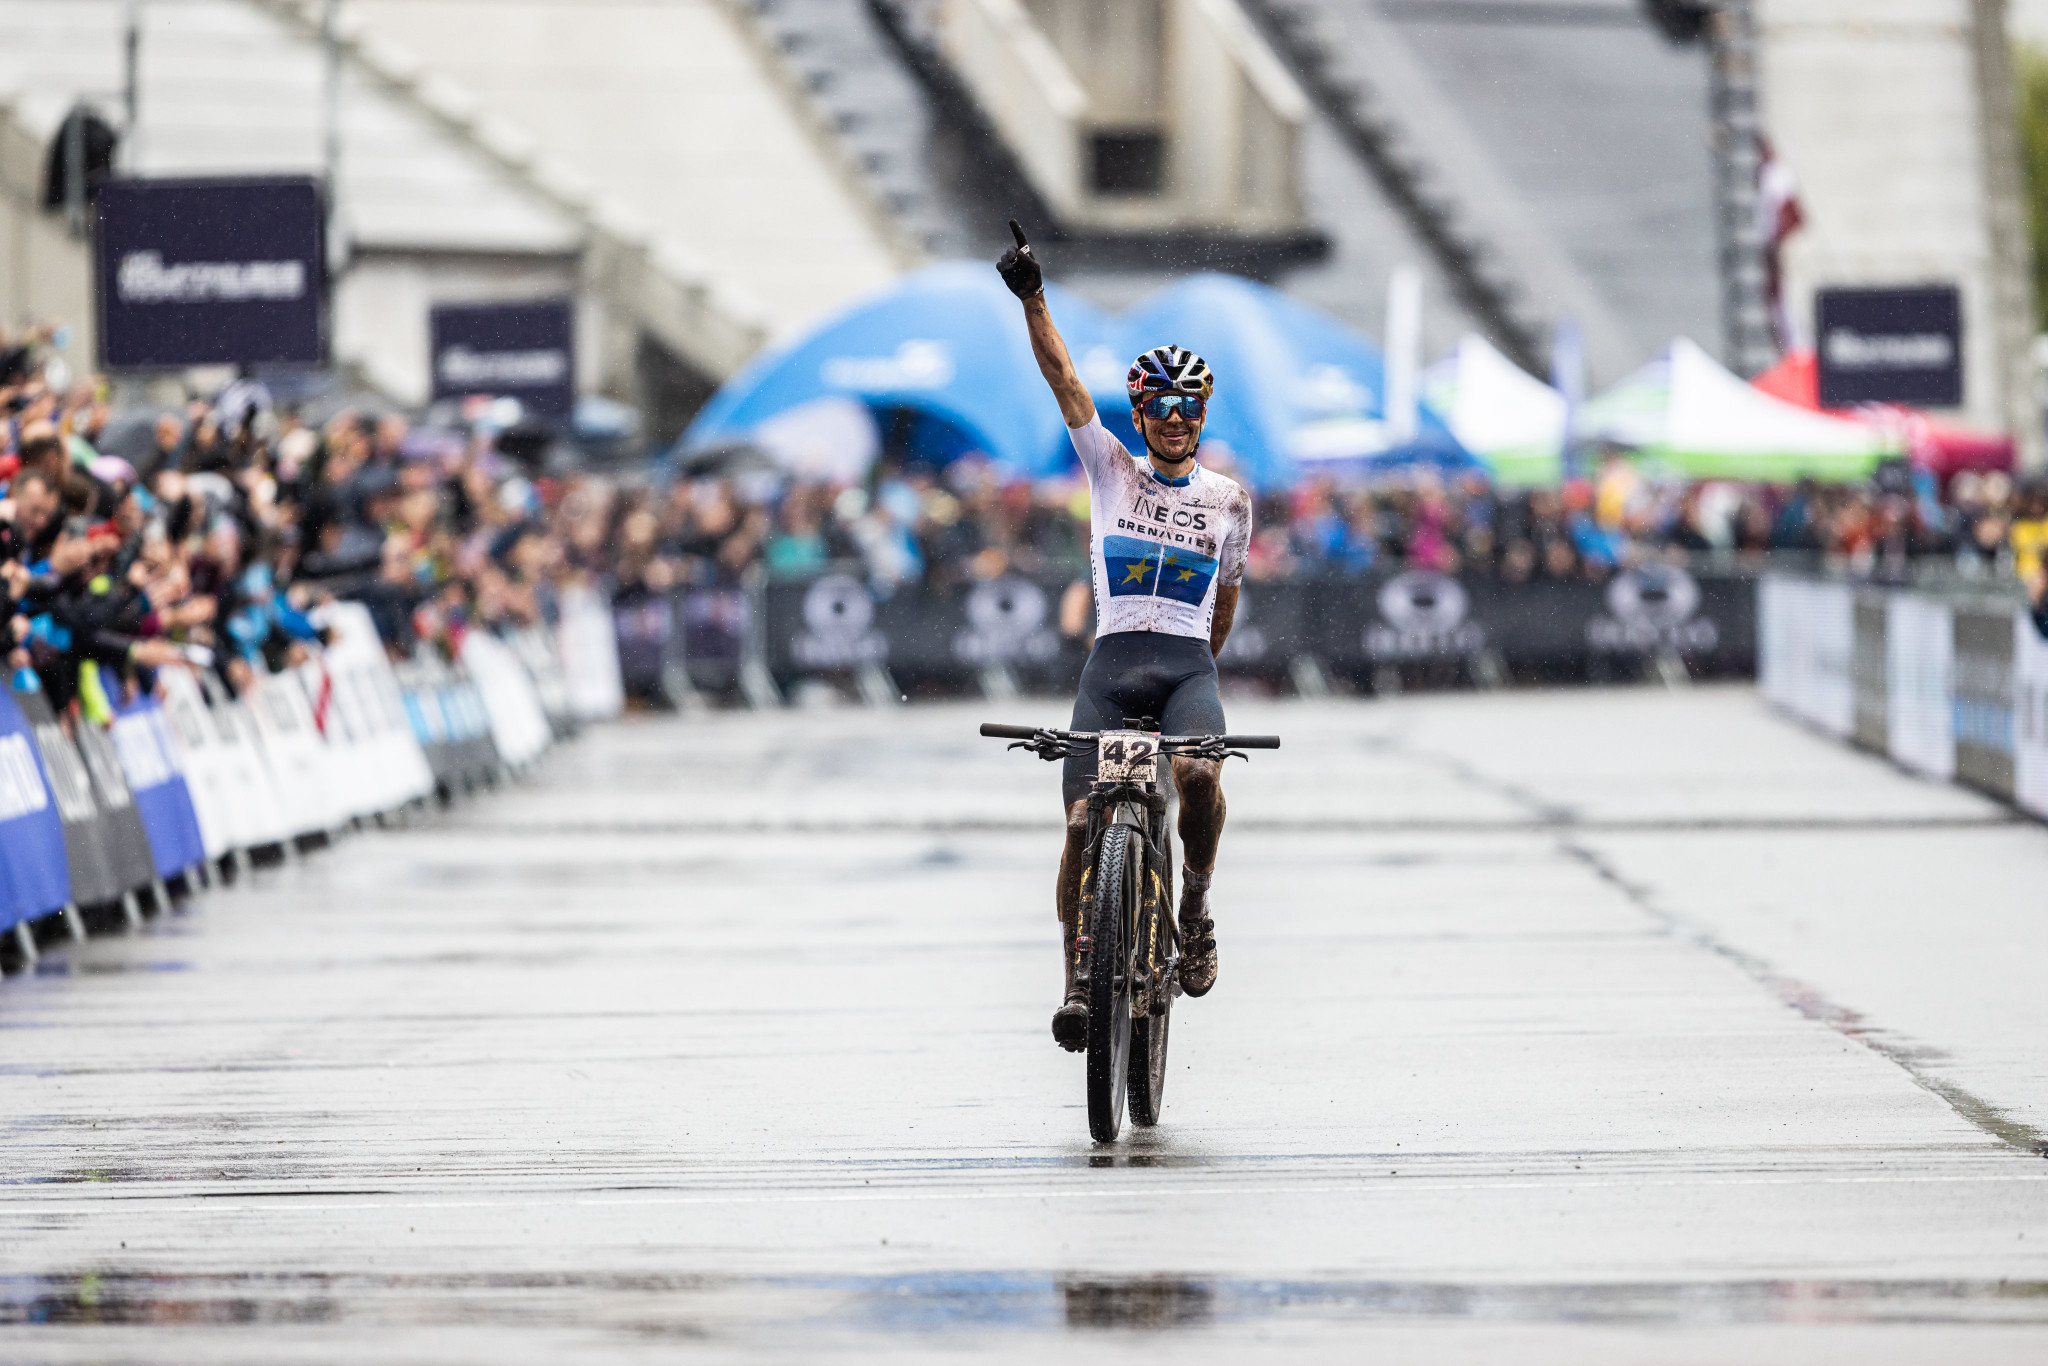 Tom Pidcock of Britain won the first XC race of the 2023 UCI Mountain Bike World Cup season in Nové Město na Moravě ©MTBworldseries/Twitter